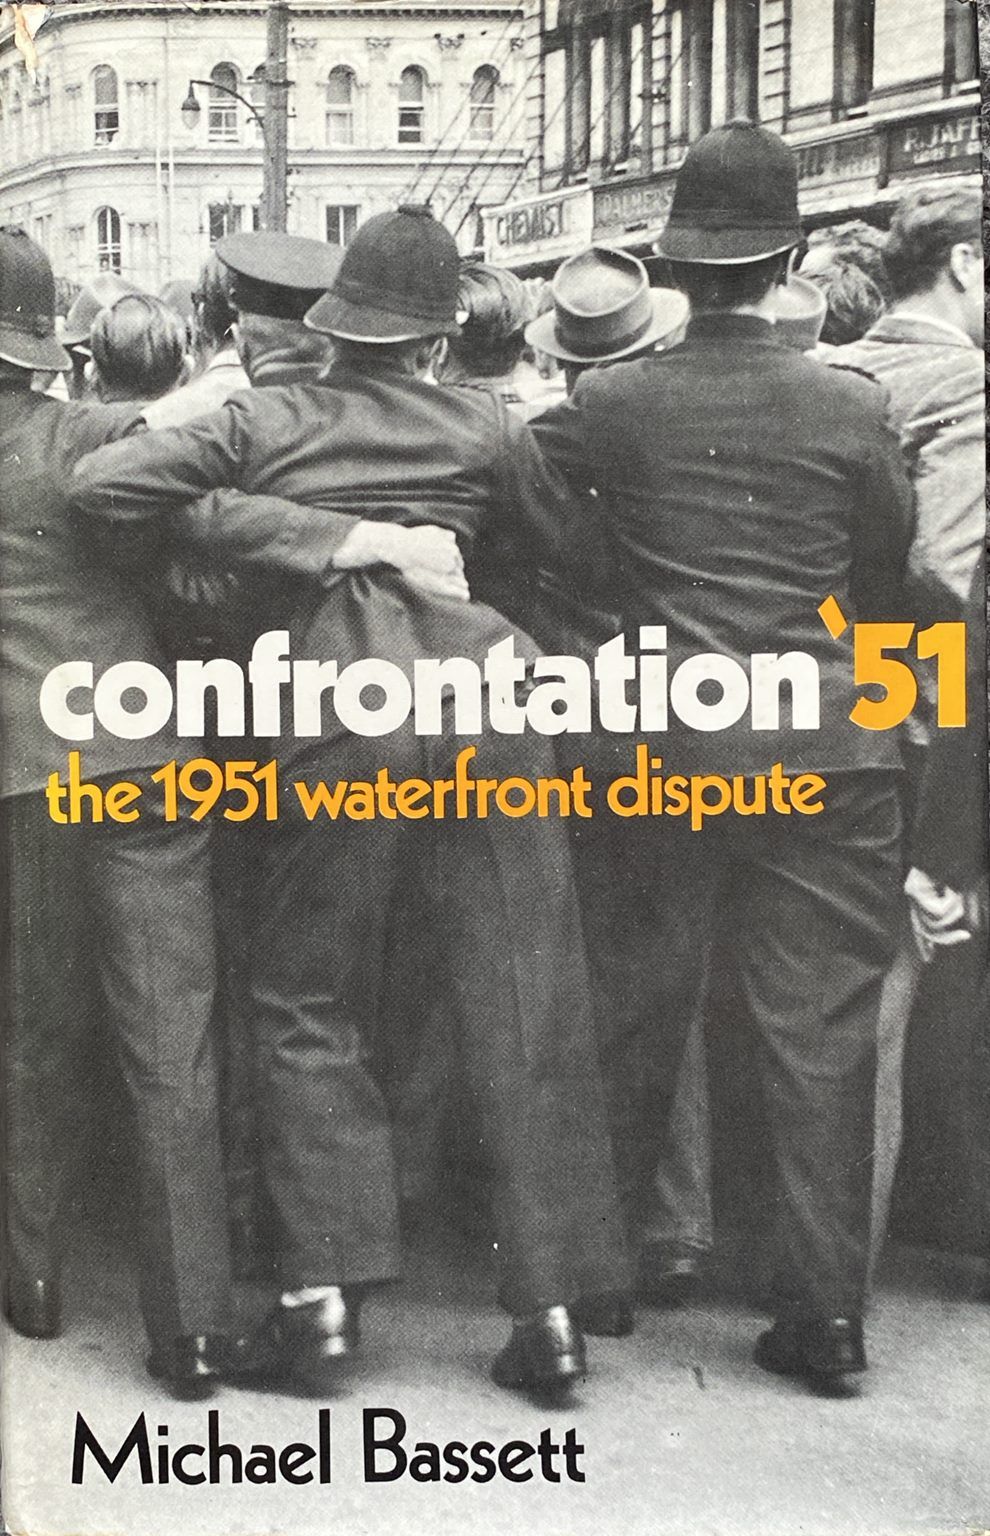 CONFRONTATION '51: The 1951 Waterfront Dispute